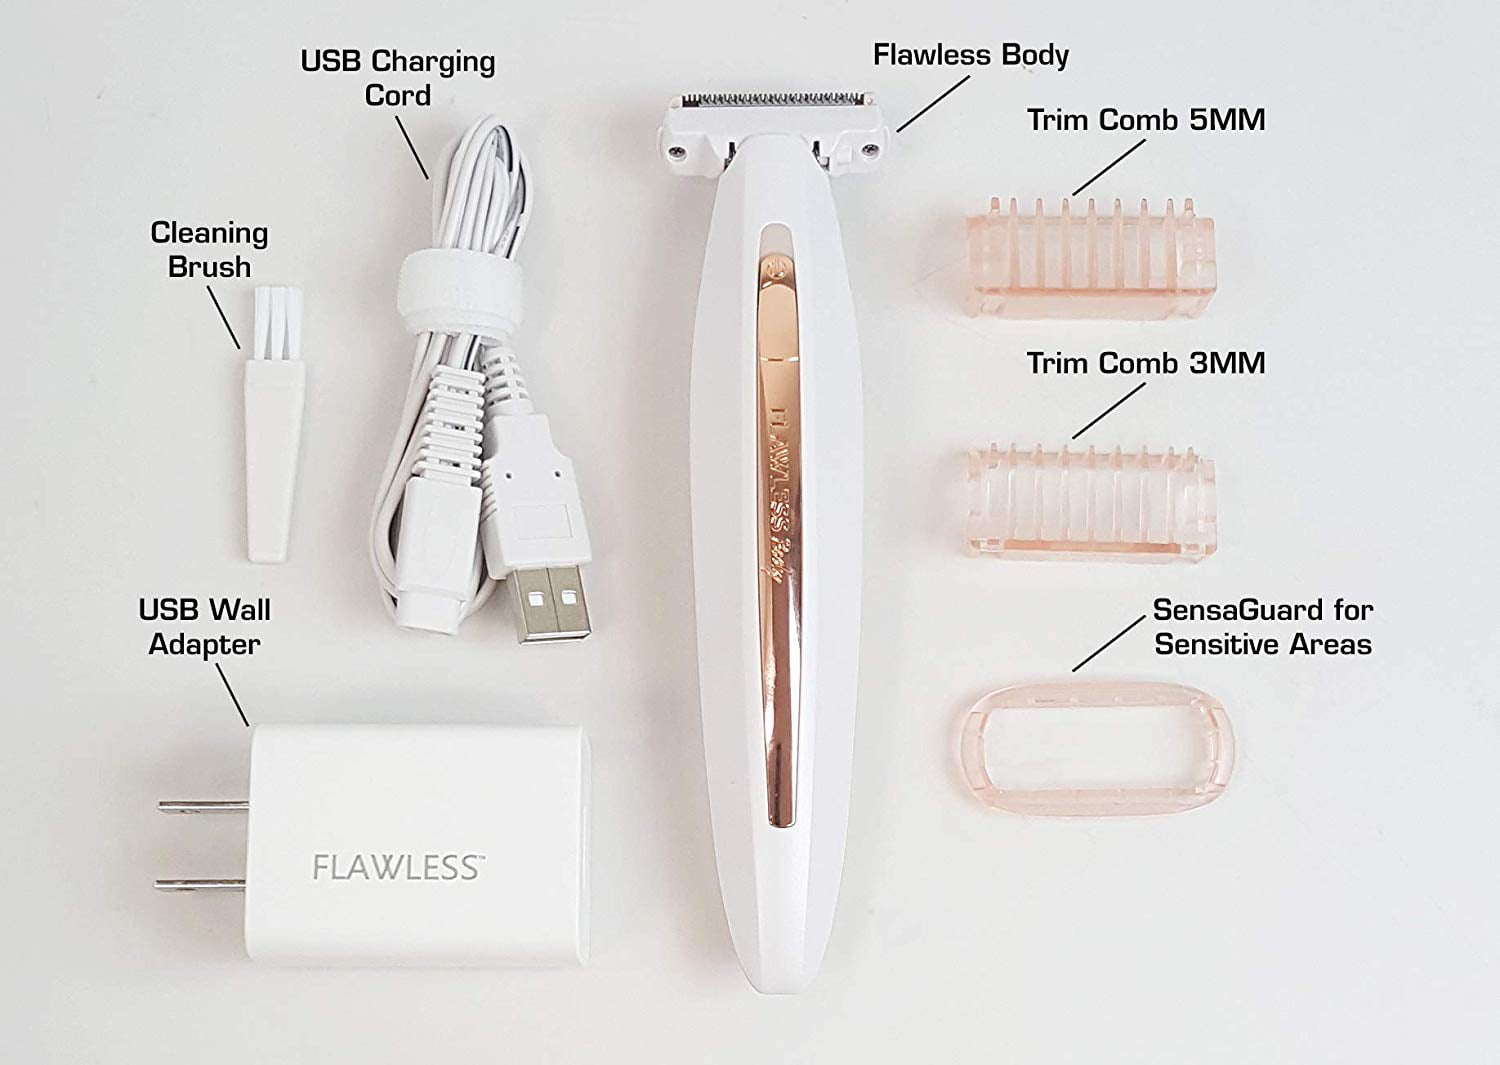 Shaver For Women Usb Charging Cable For Finishing Touch Flawless Body Rechargeab 